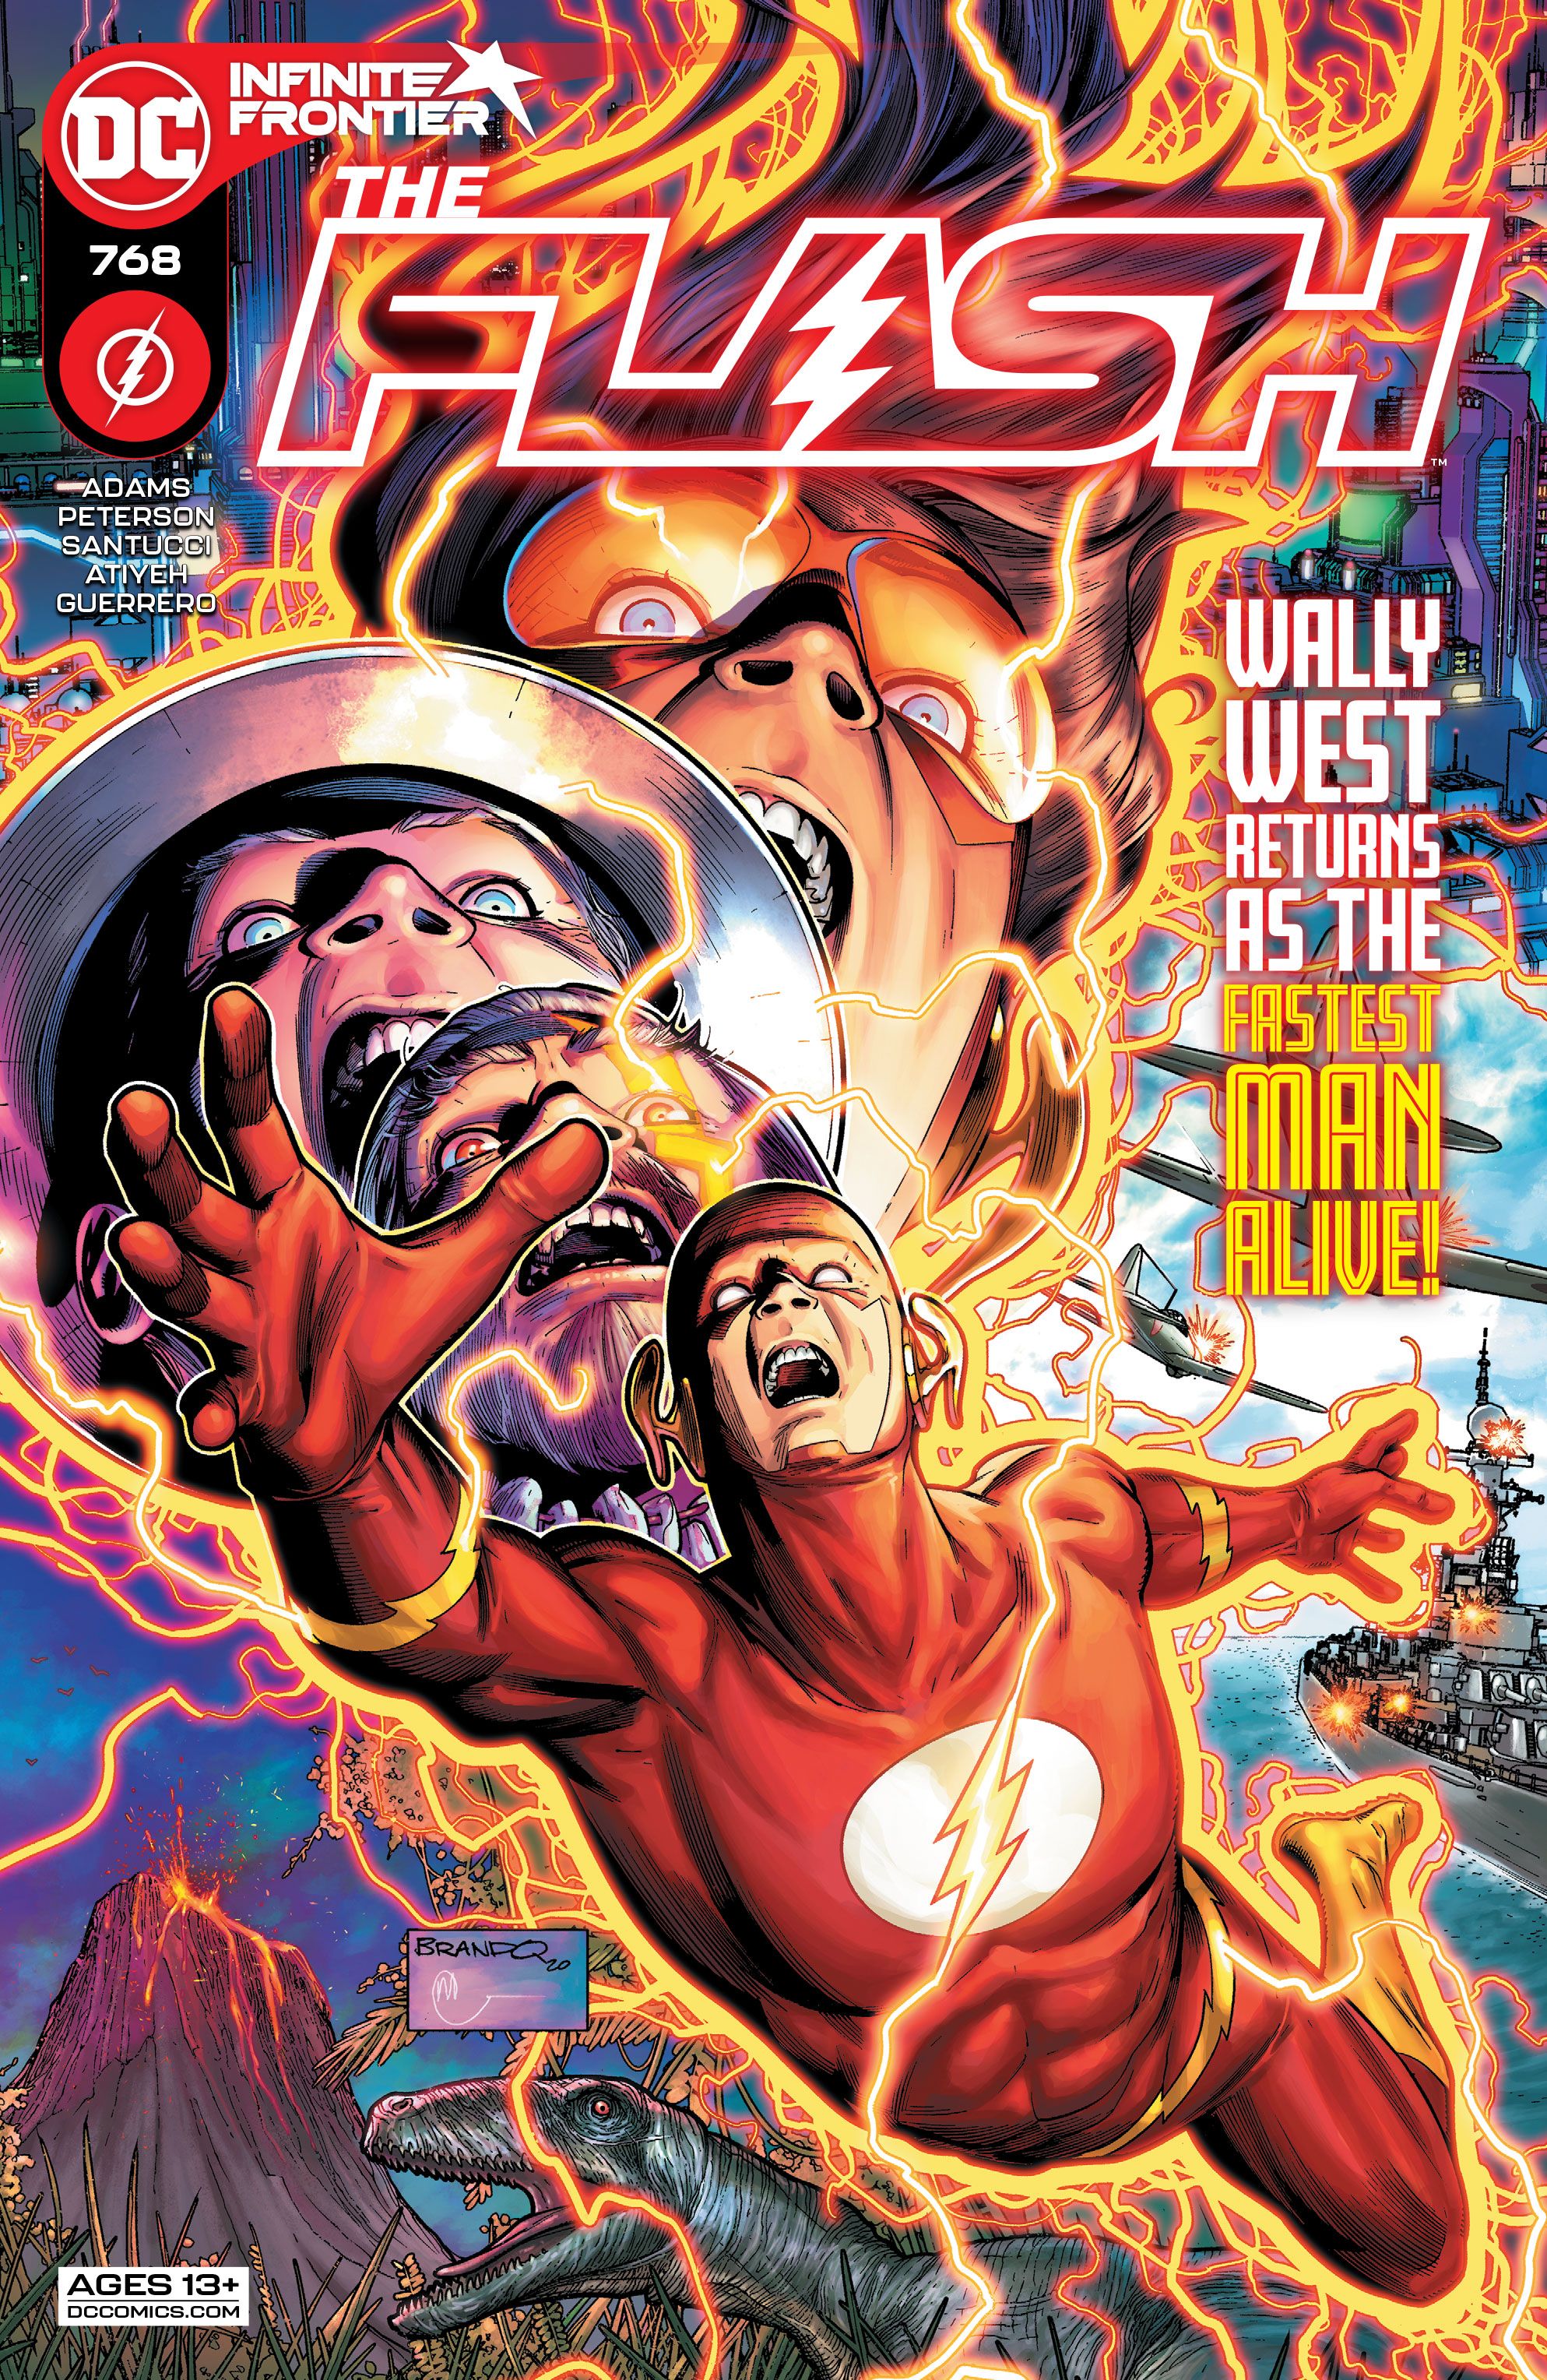 Wally West Is Officially Retiring As The Flash